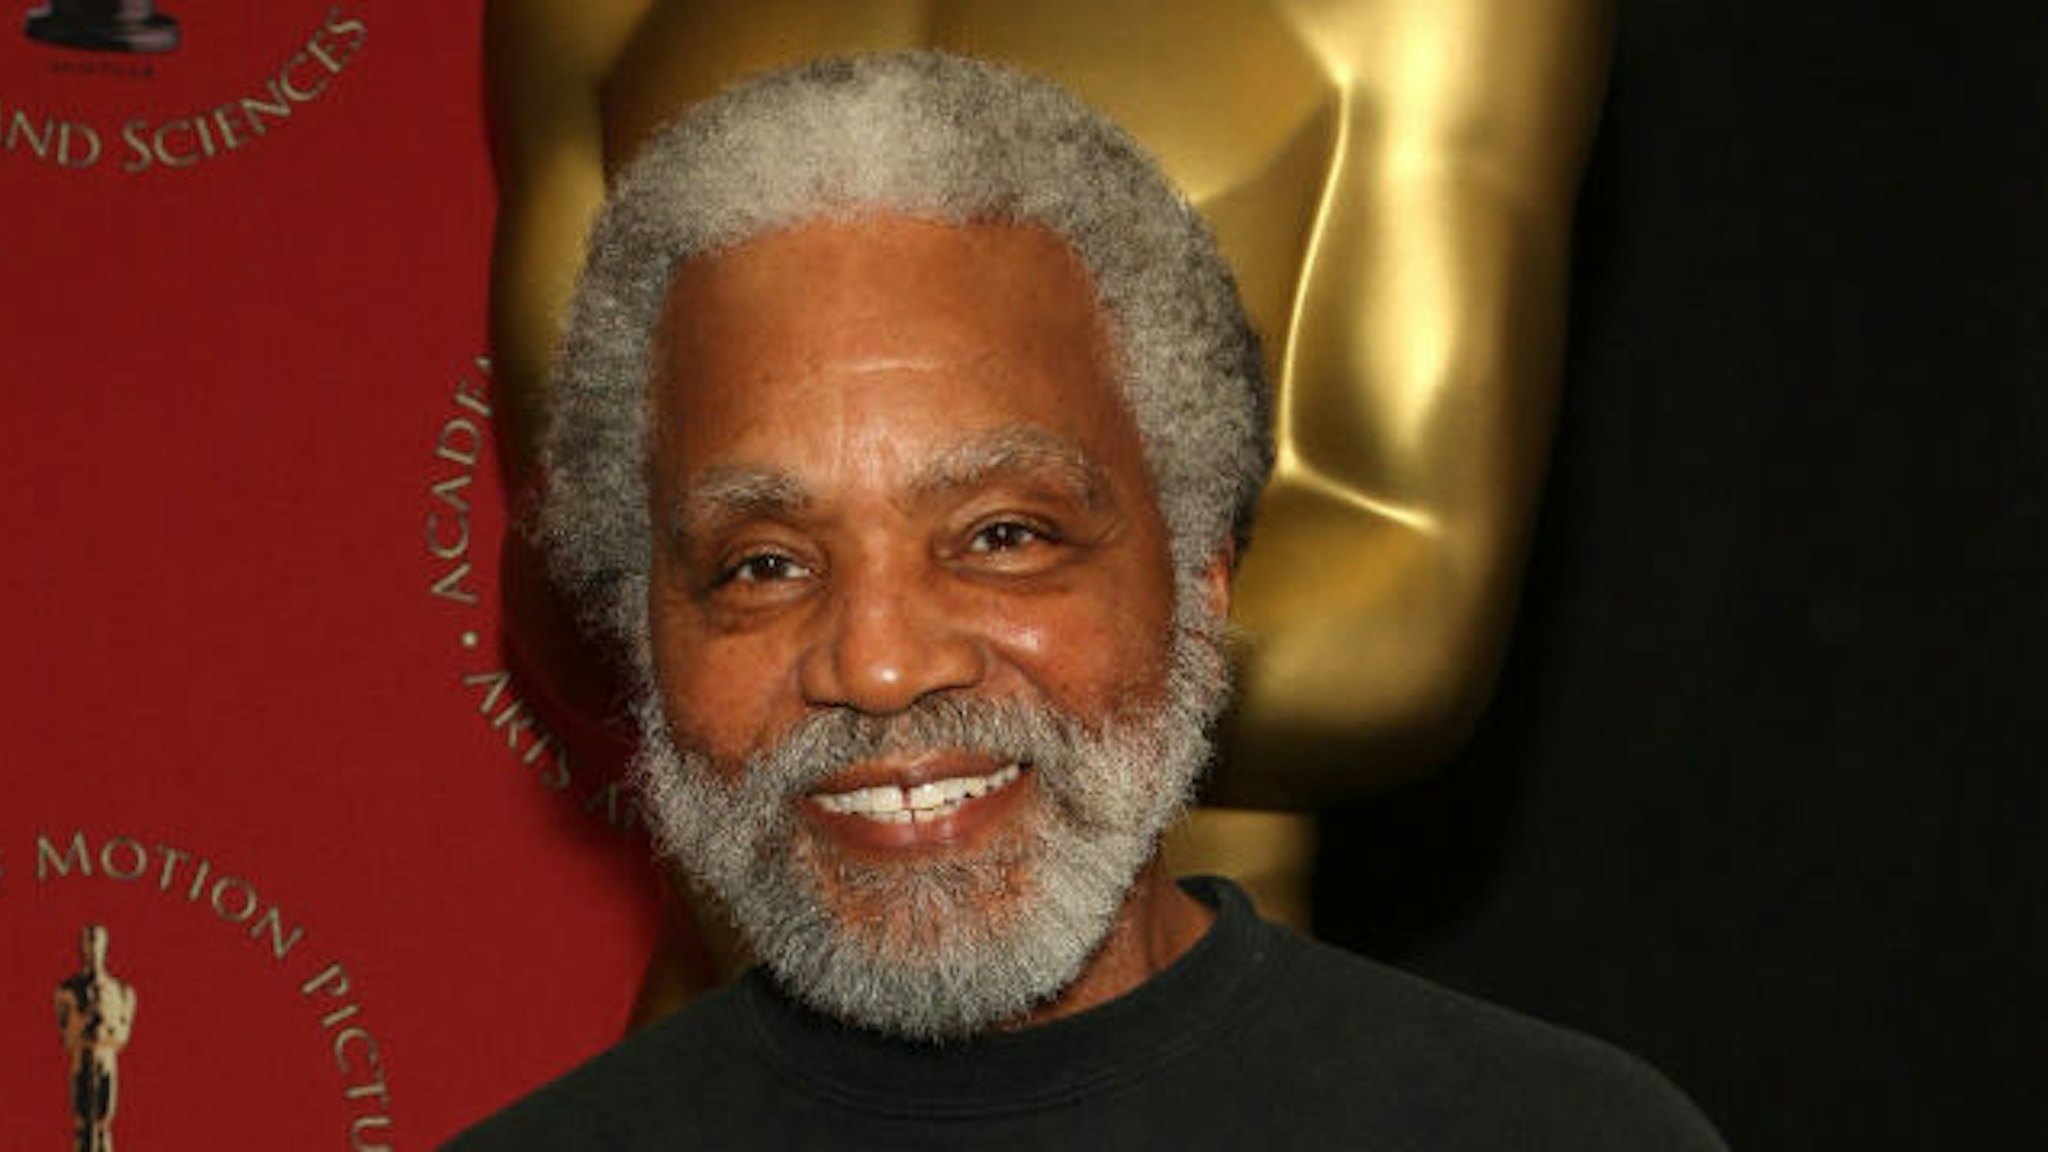 Nebraska State Senator Ernie Chambers attends the AMPAS hosts a screening of "A Time For Burning" at the Academy Theater on October 20, 2008 in New York City. (Photo by Bryan Bedder/Getty Images)